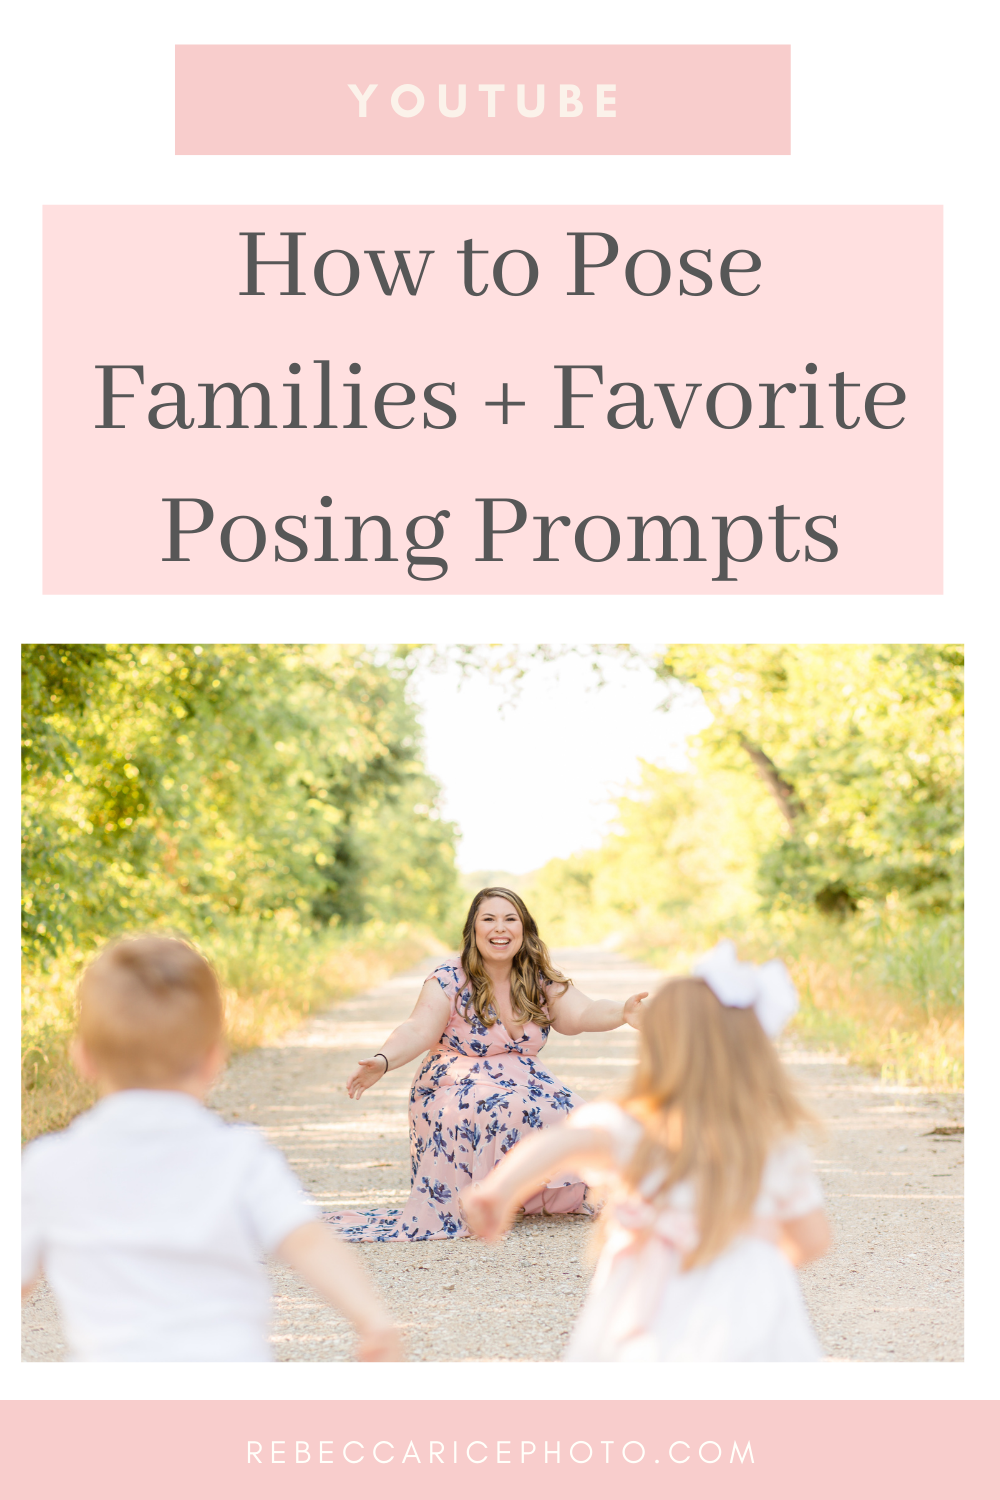 youtube video showing how to pose families and favorite posing prompts